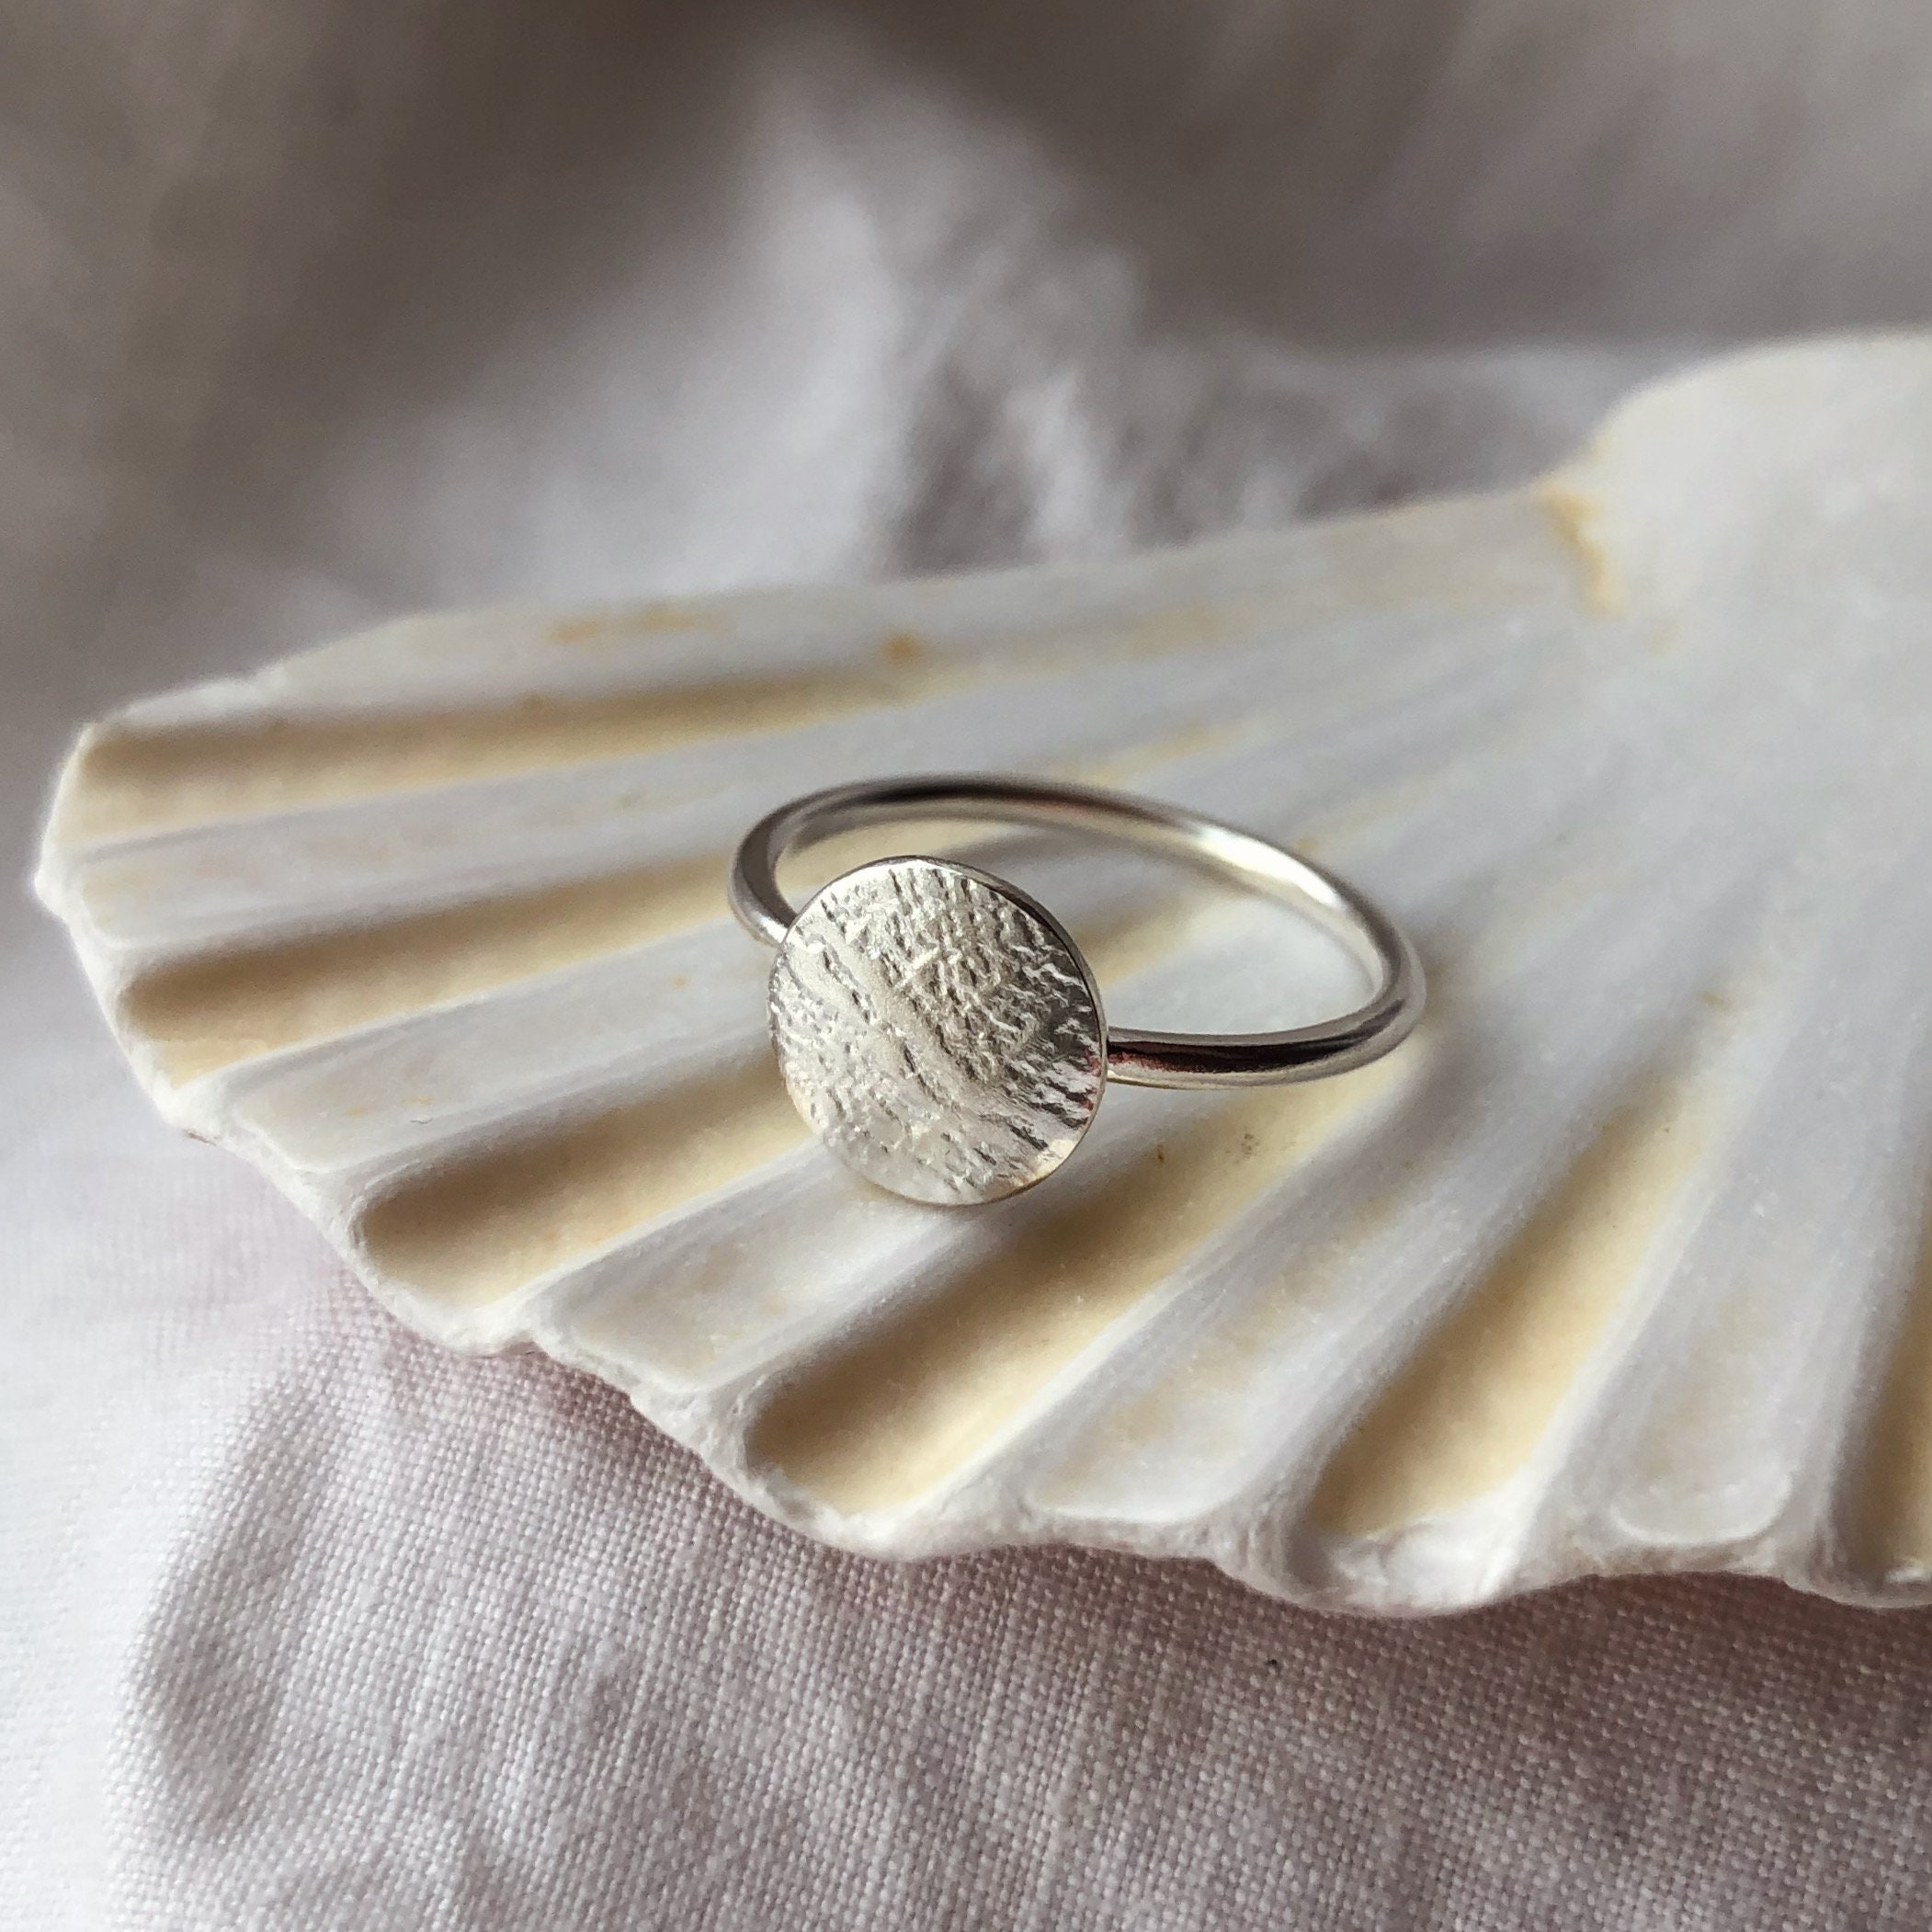 Recycled Silver Circle Ring, Textured Disc Stacking Rings, Love Token, Handmade Sustainable Jewellery